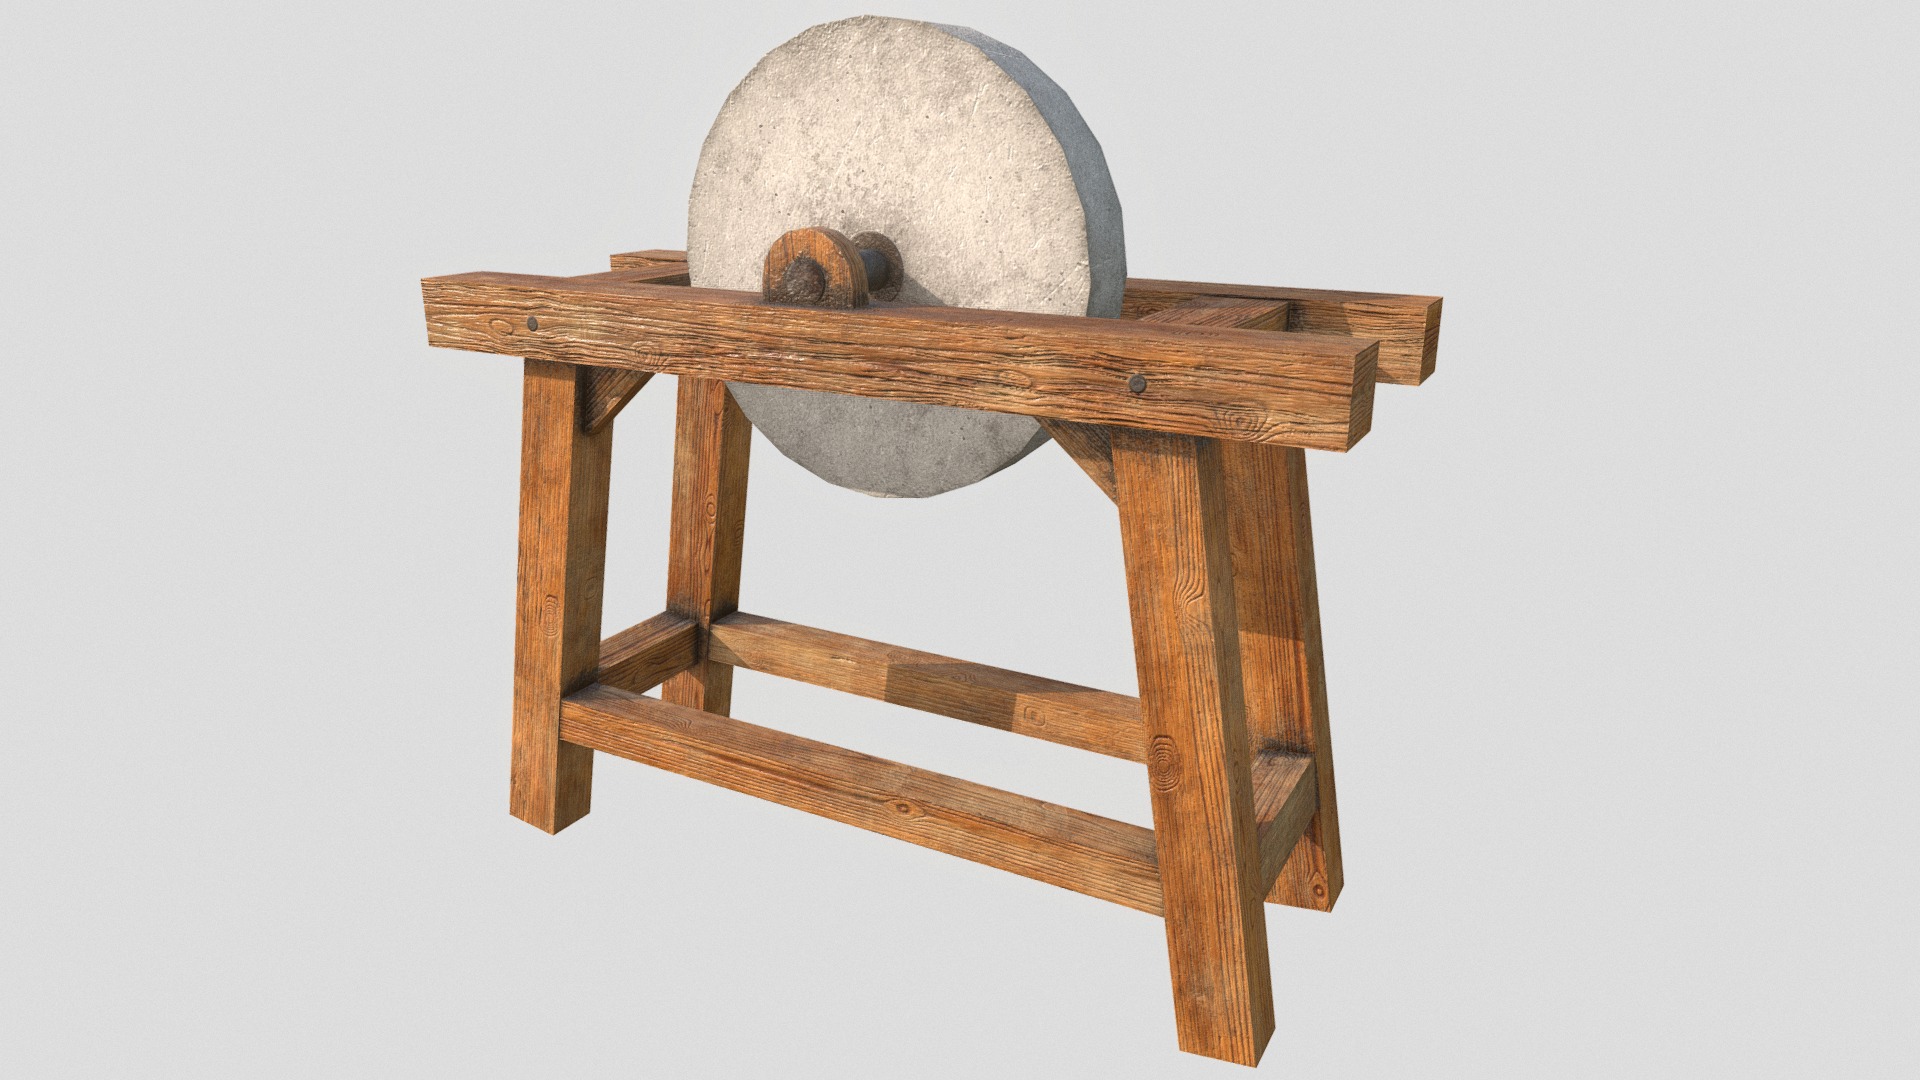 3D model Grindstone - This is a 3D model of the Grindstone. The 3D model is about a cat sitting on a chair.